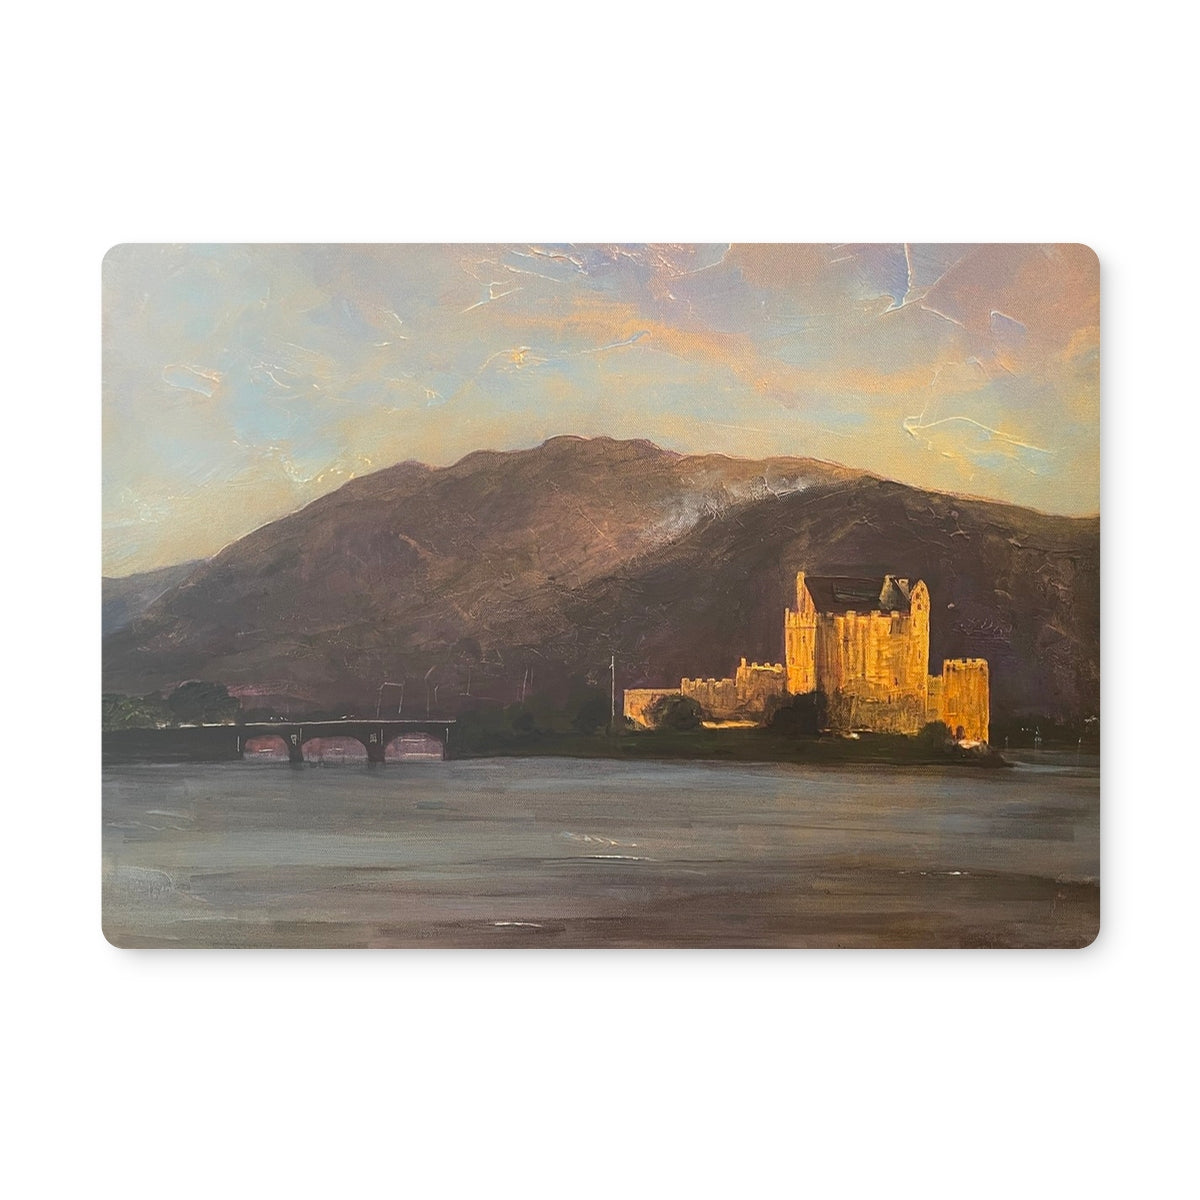 Eilean Donan Castle Art Gifts Placemat-Placemats-Historic & Iconic Scotland Art Gallery-Single Placemat-Paintings, Prints, Homeware, Art Gifts From Scotland By Scottish Artist Kevin Hunter